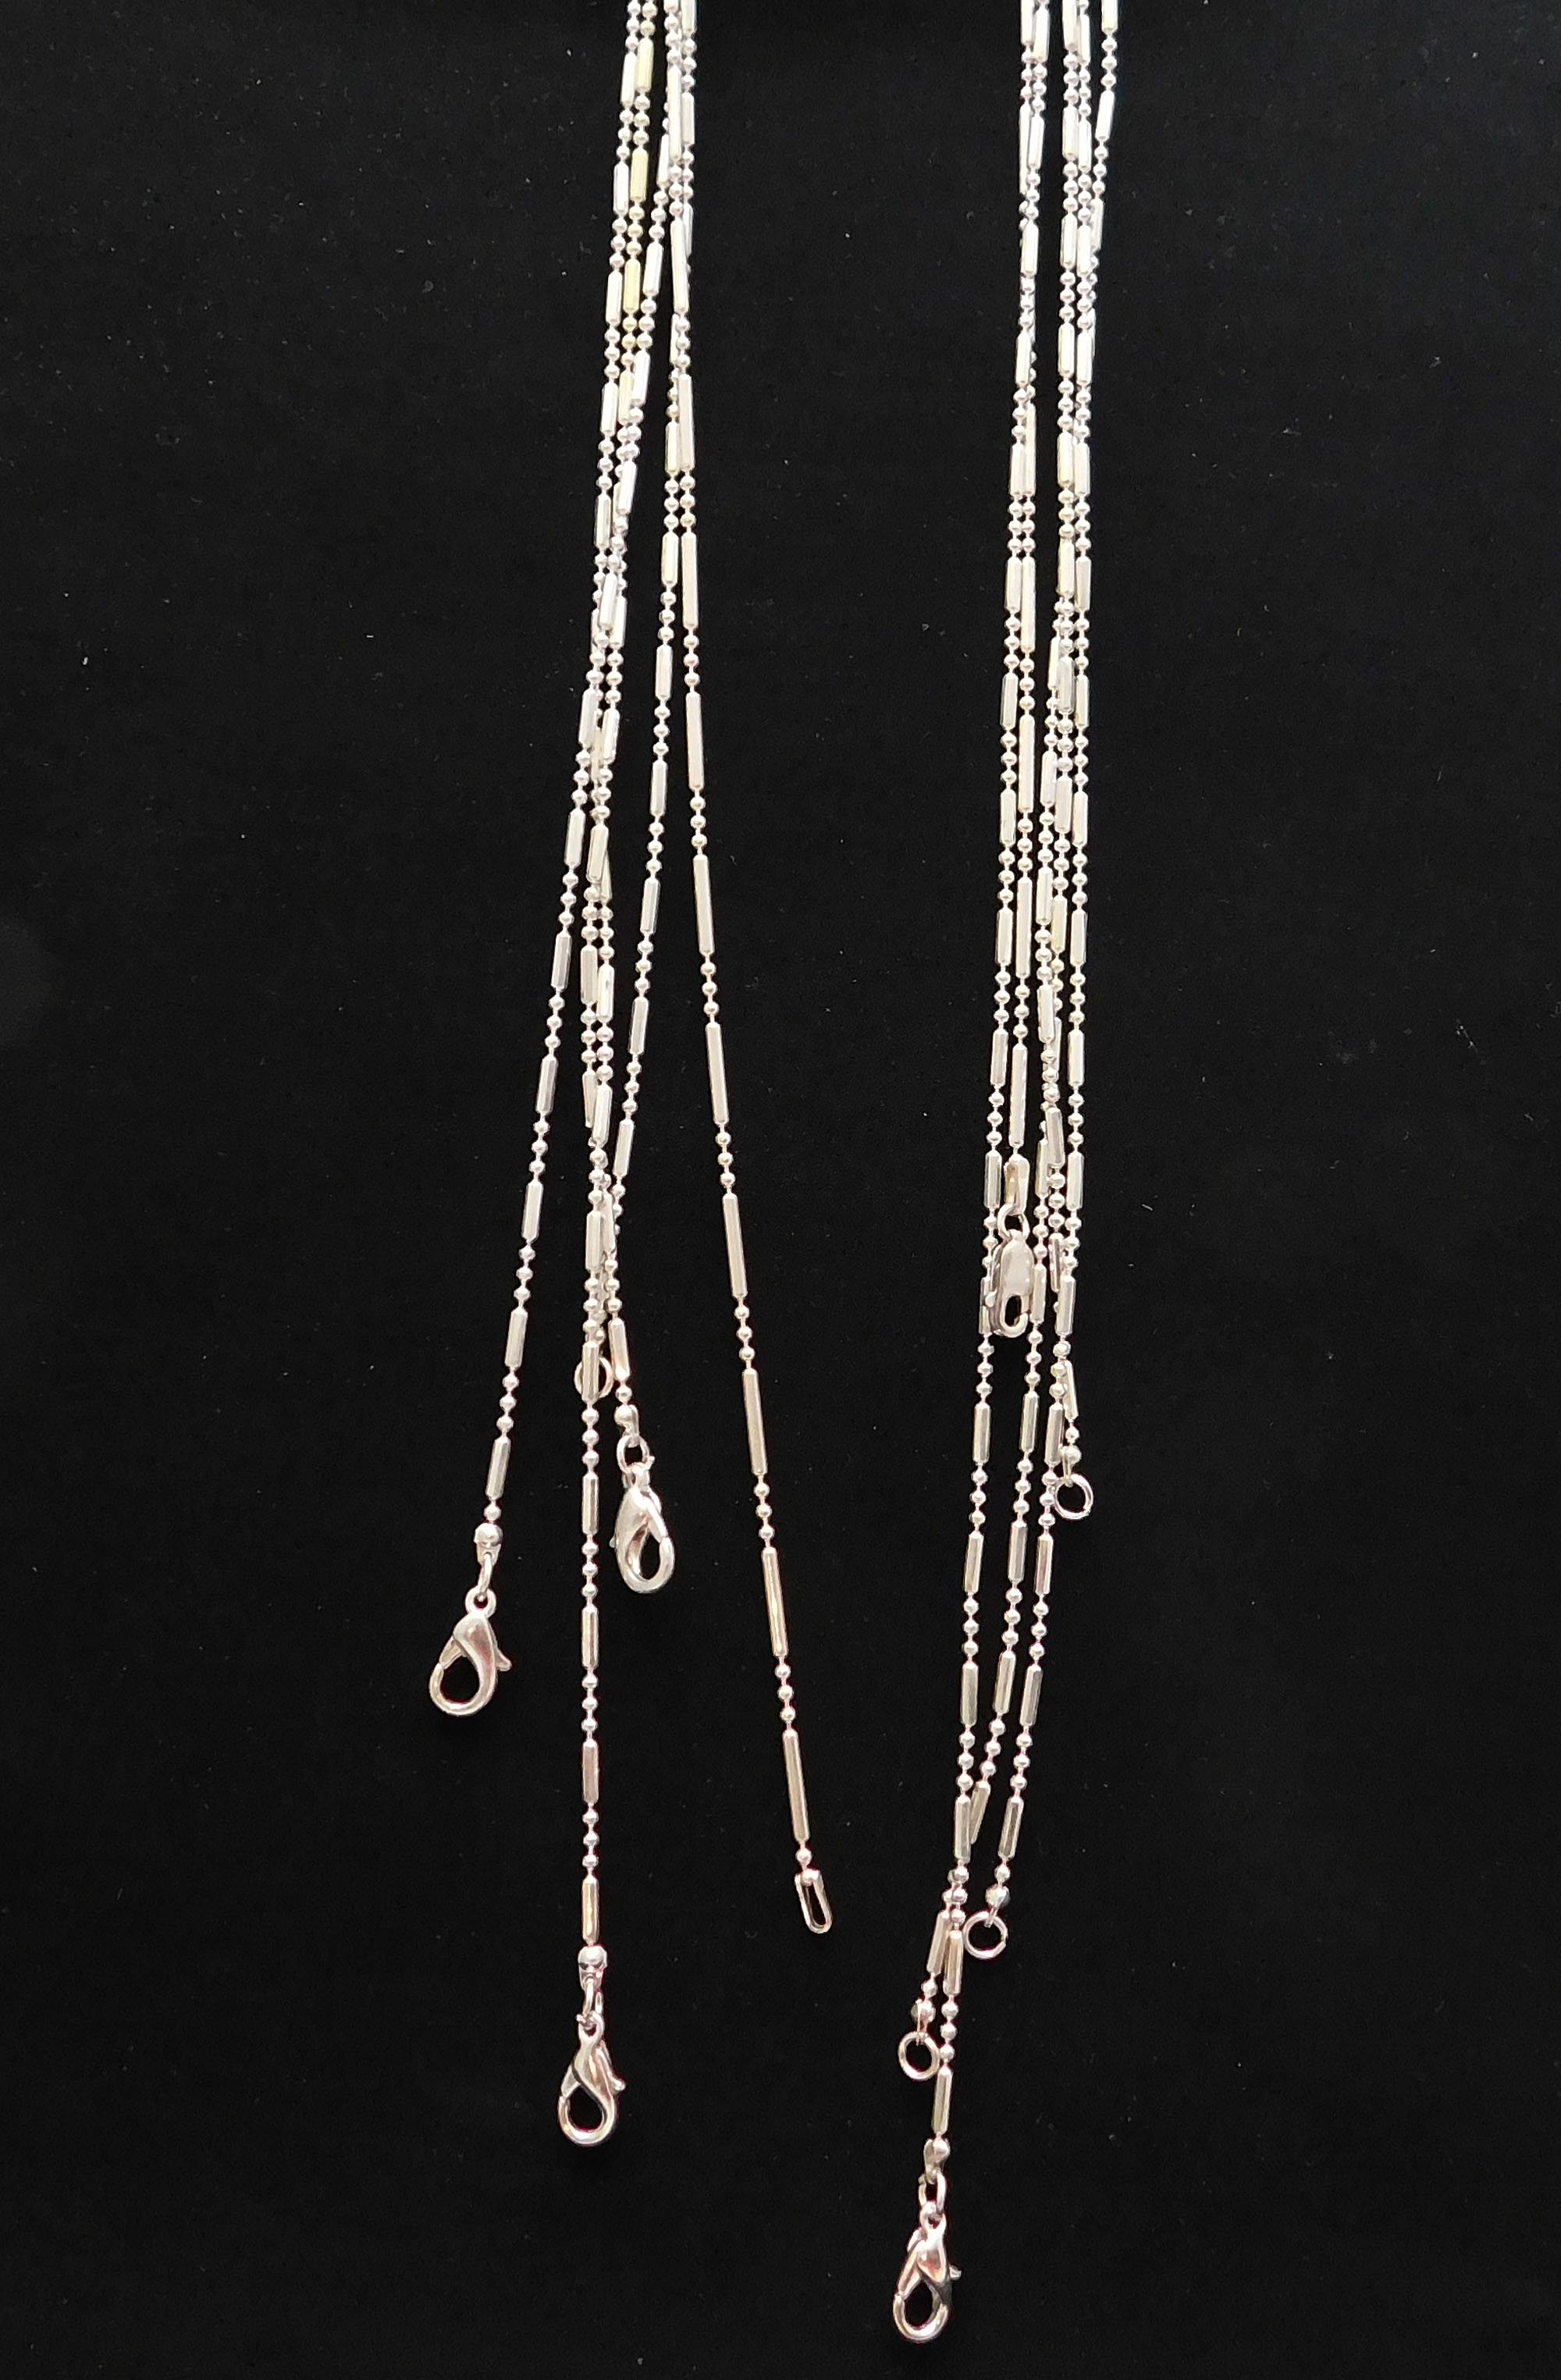 Neck Chain sterling silver, ball and bar, 18 inches